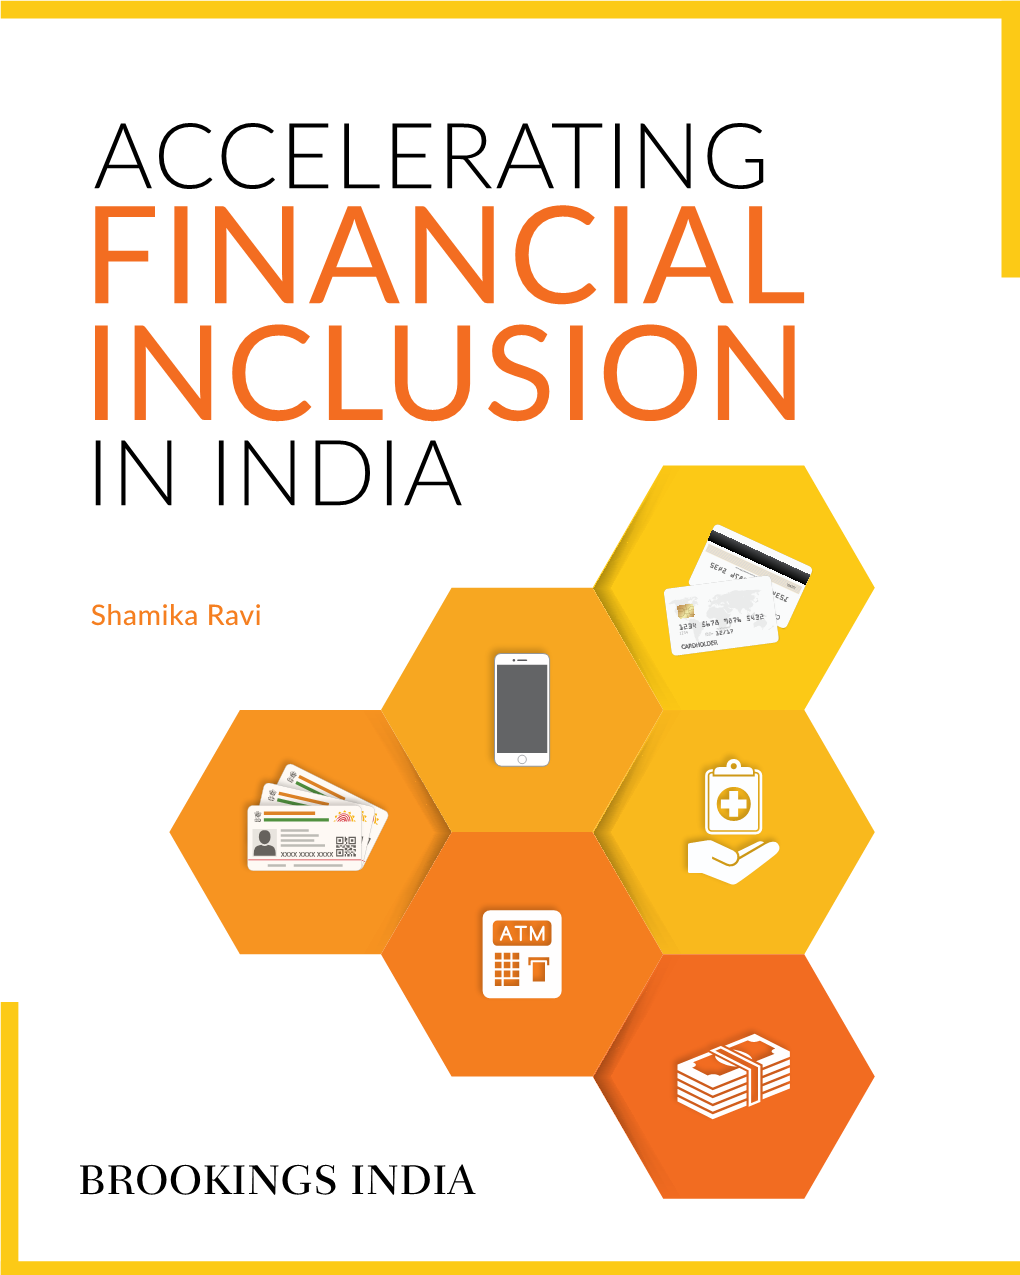 Accelerating Financial Inclusion in India